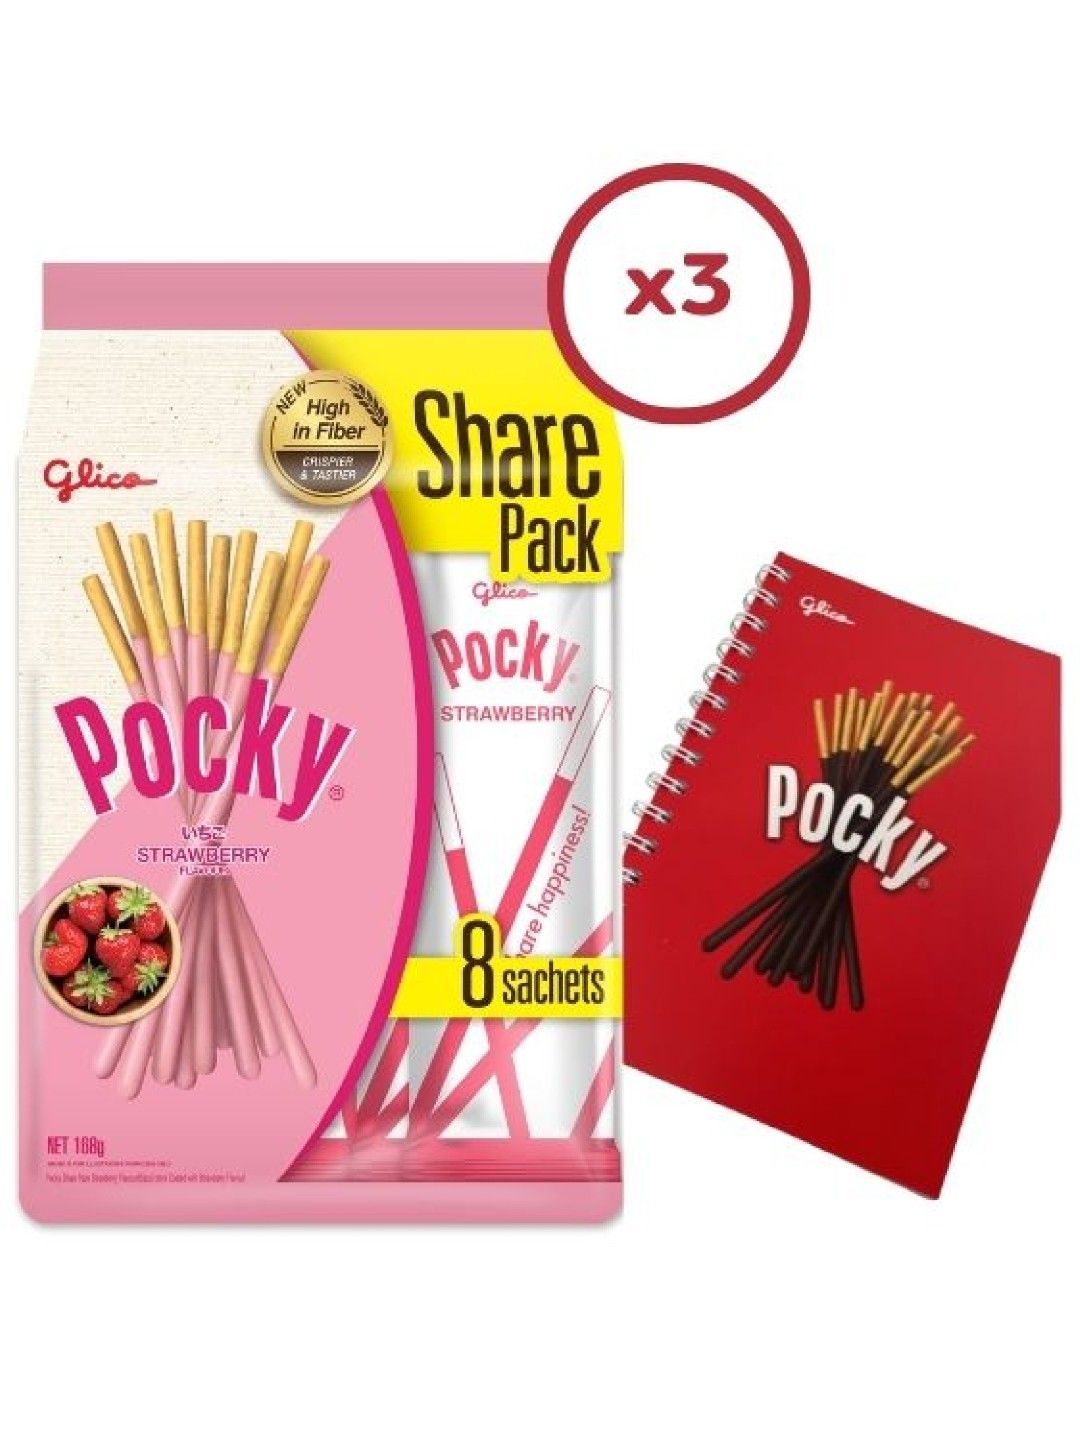 Pocky Strawberry Biscuit Sticks Share Pack (Bundle of 3) with FREE Glico Notebook (No Color- Image 1)